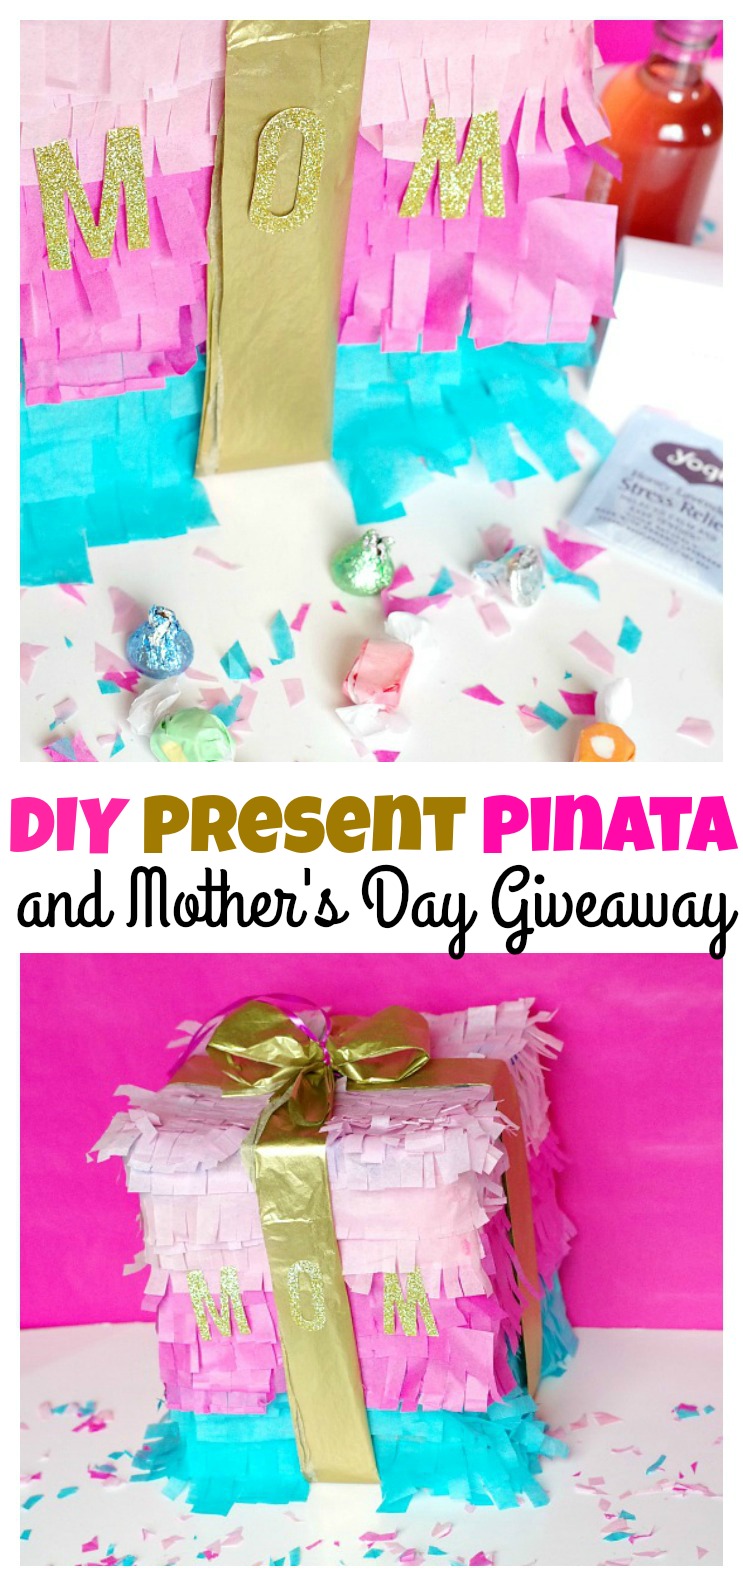 DIY Present Pinata and Mother's Day Giveaway